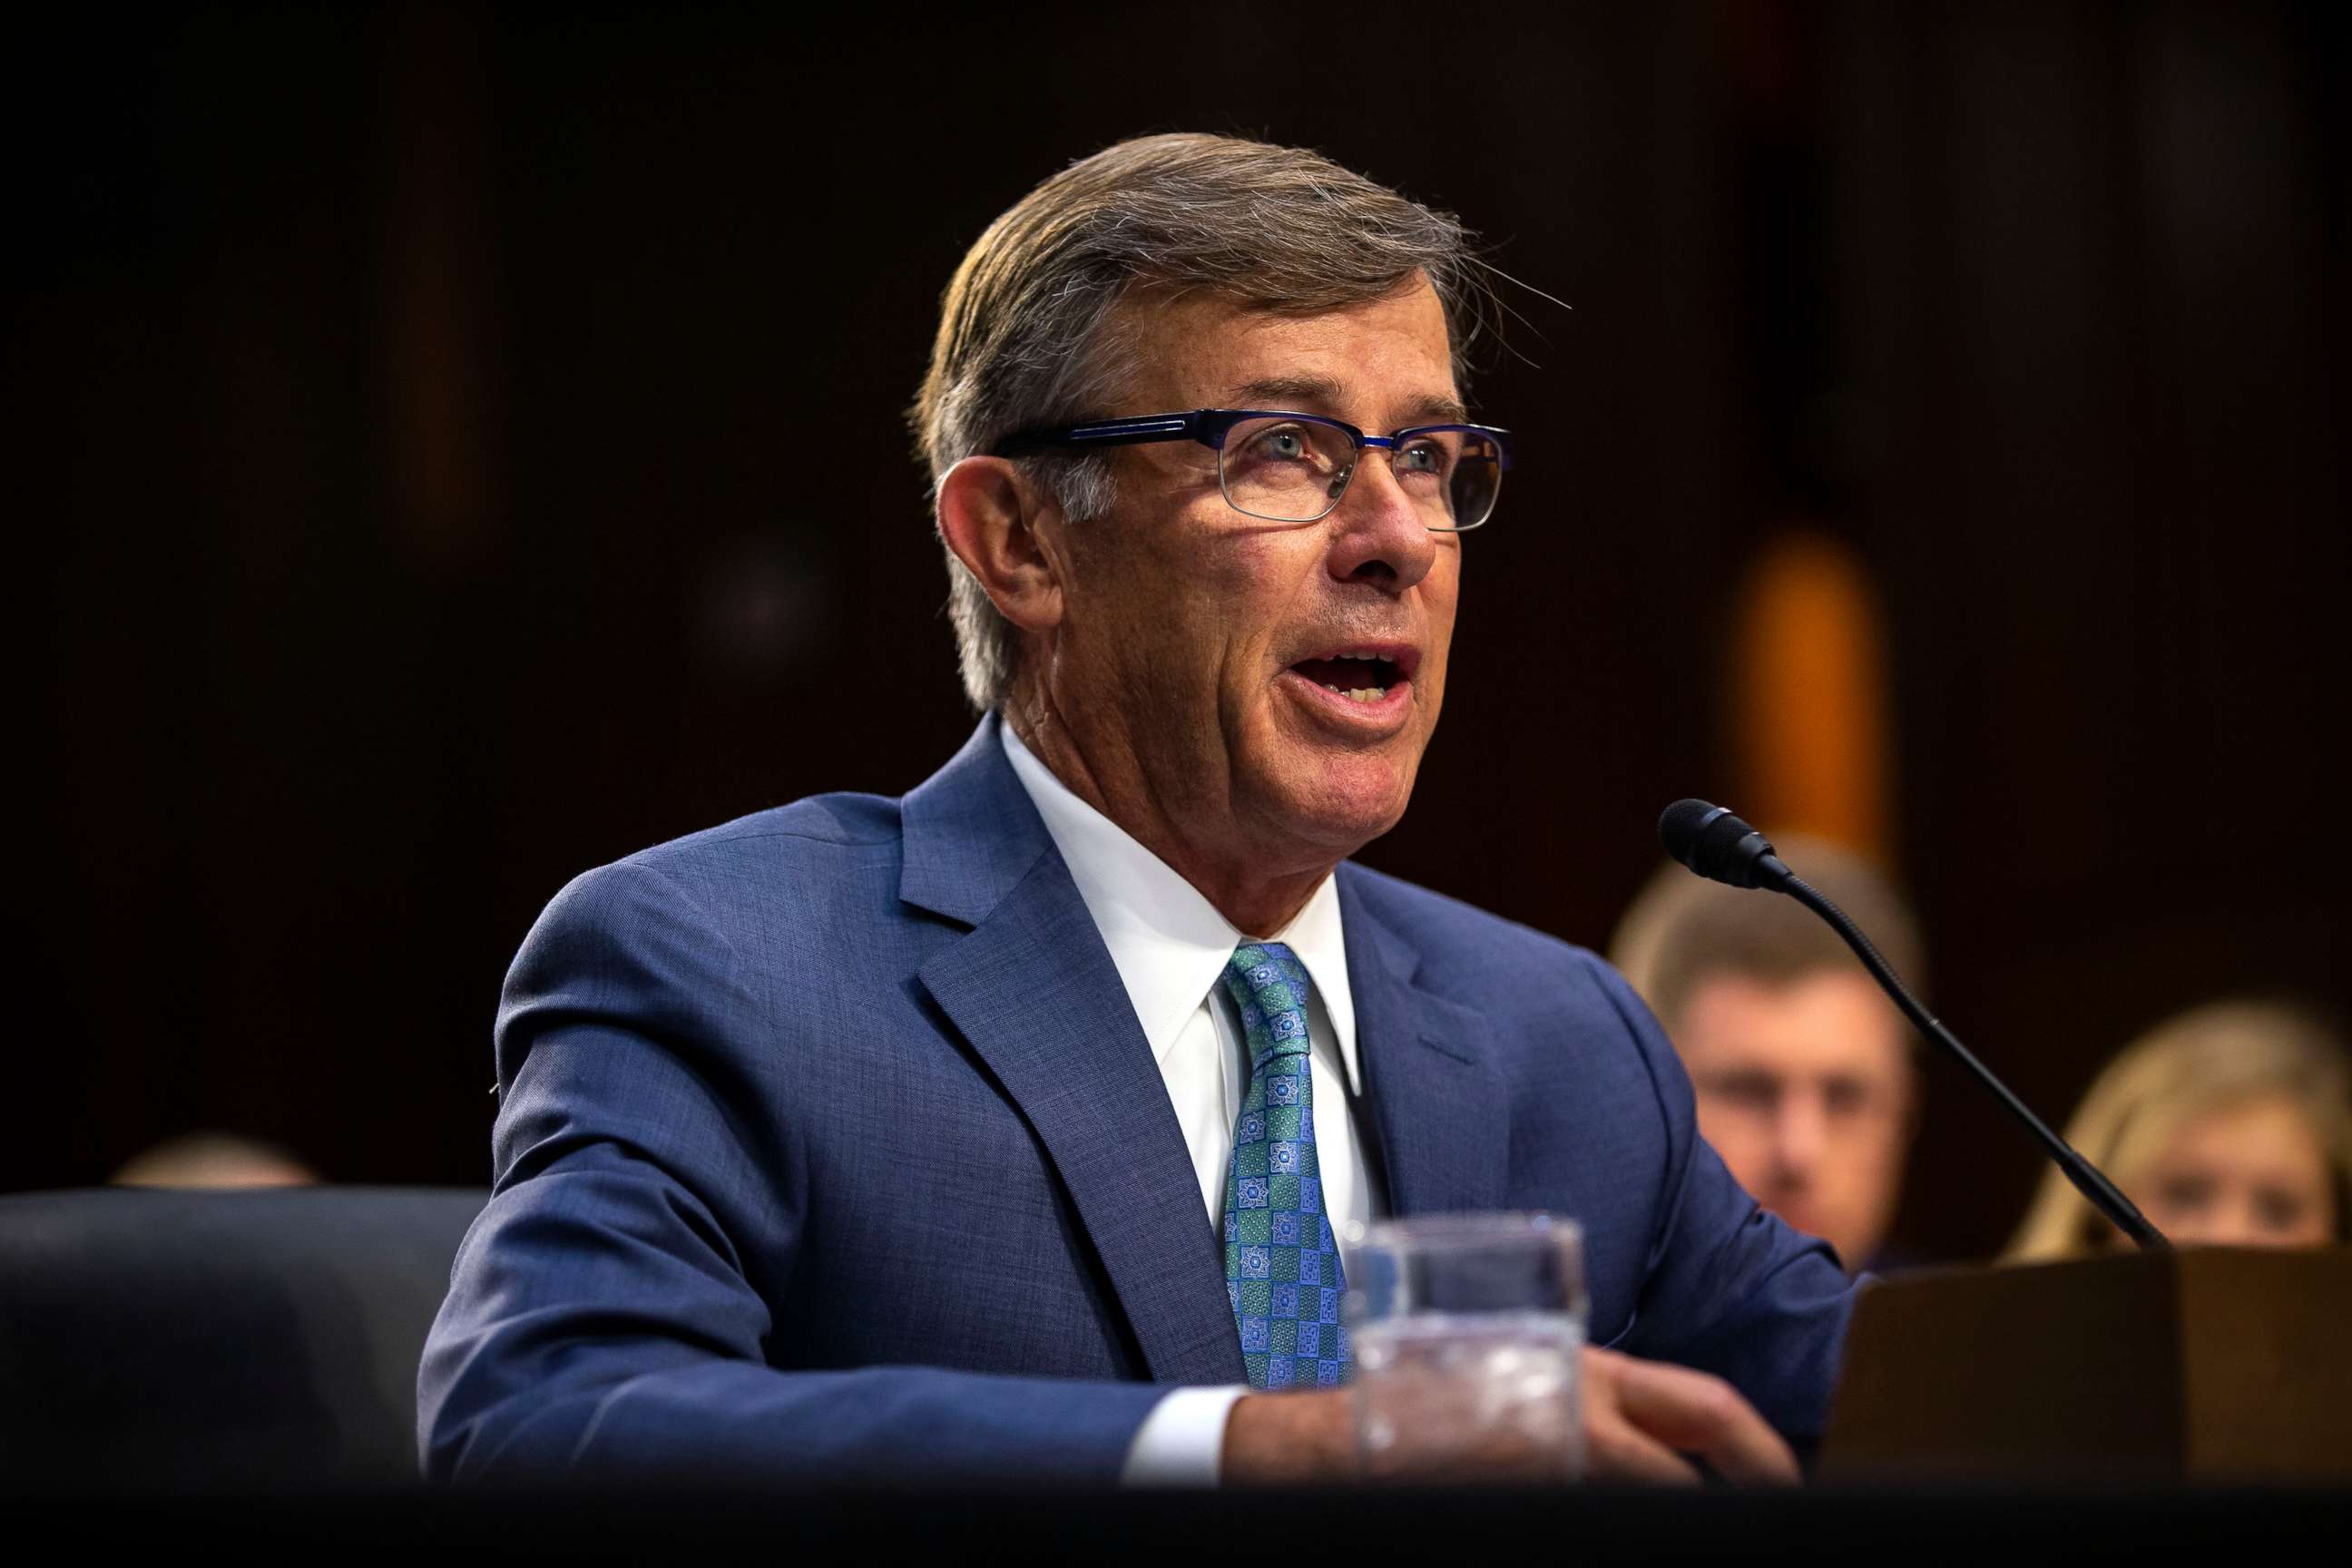 PHOTO: Retired Vice Adm. Joseph Maguire testifies during a Senate Intelligence Committee hearing to be confirmed as the director of the National Counterterrorism Center on Capitol Hill, July 25, 2018, in Washington, DC.